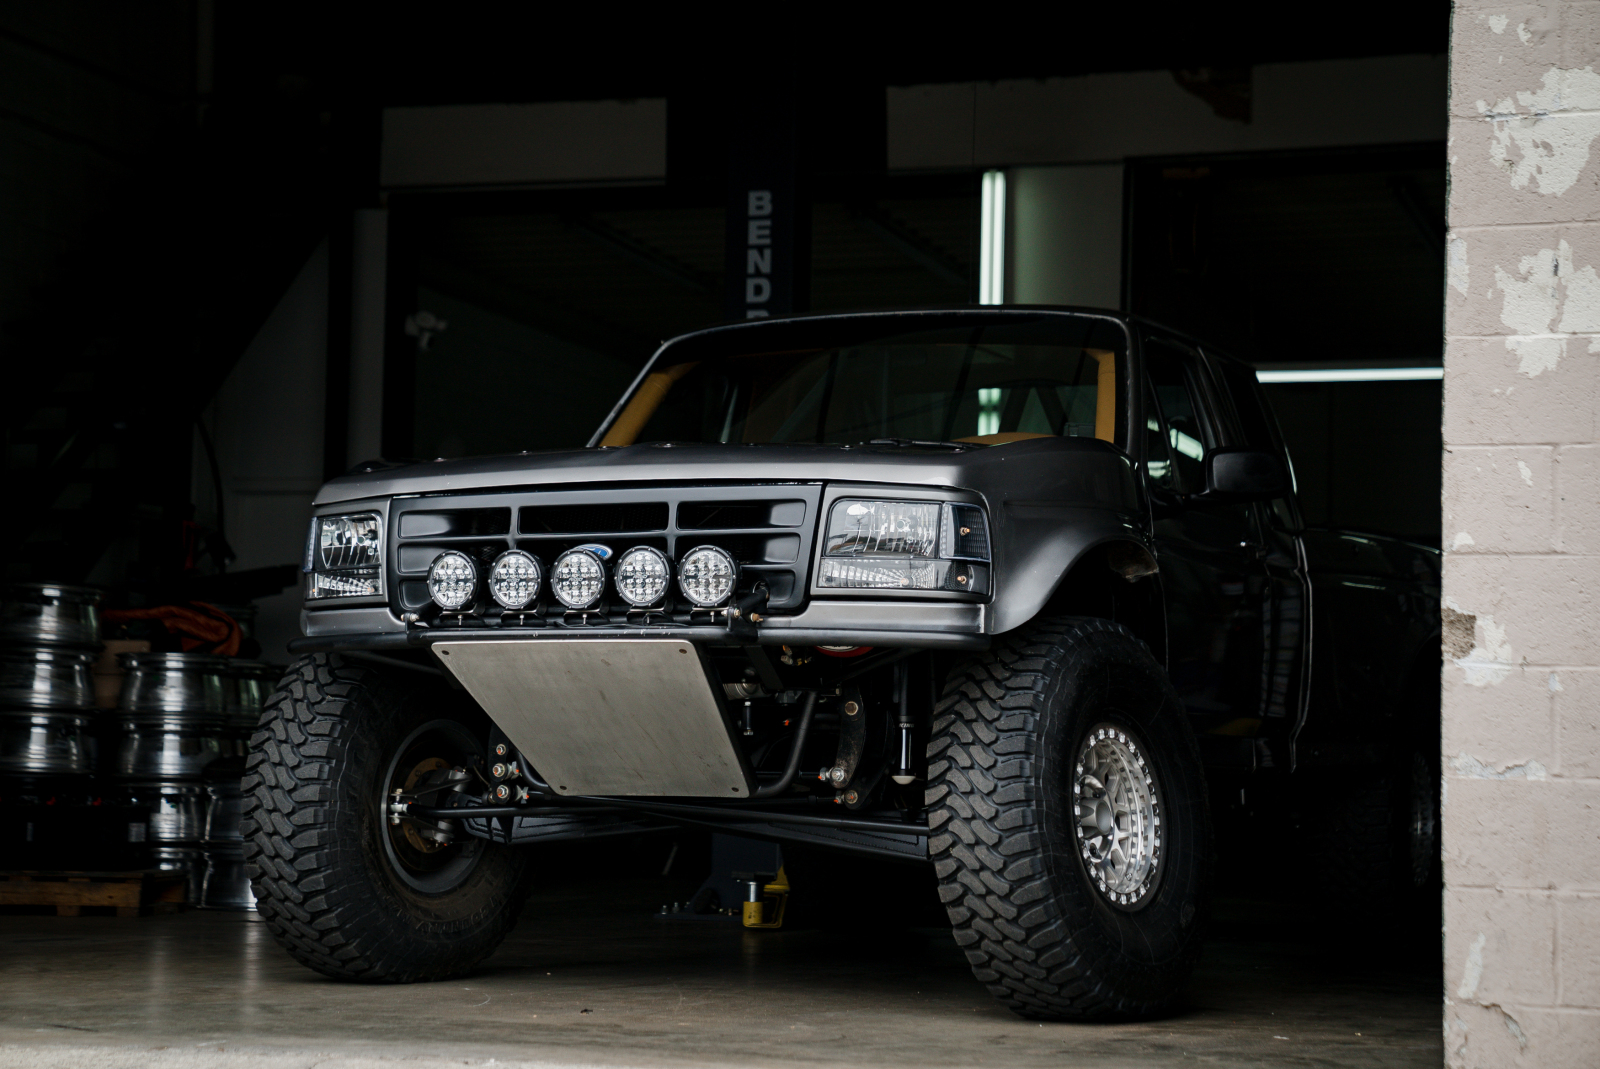 For Sale: OBS Ford F-150 Luxury Prerunner  - photo3